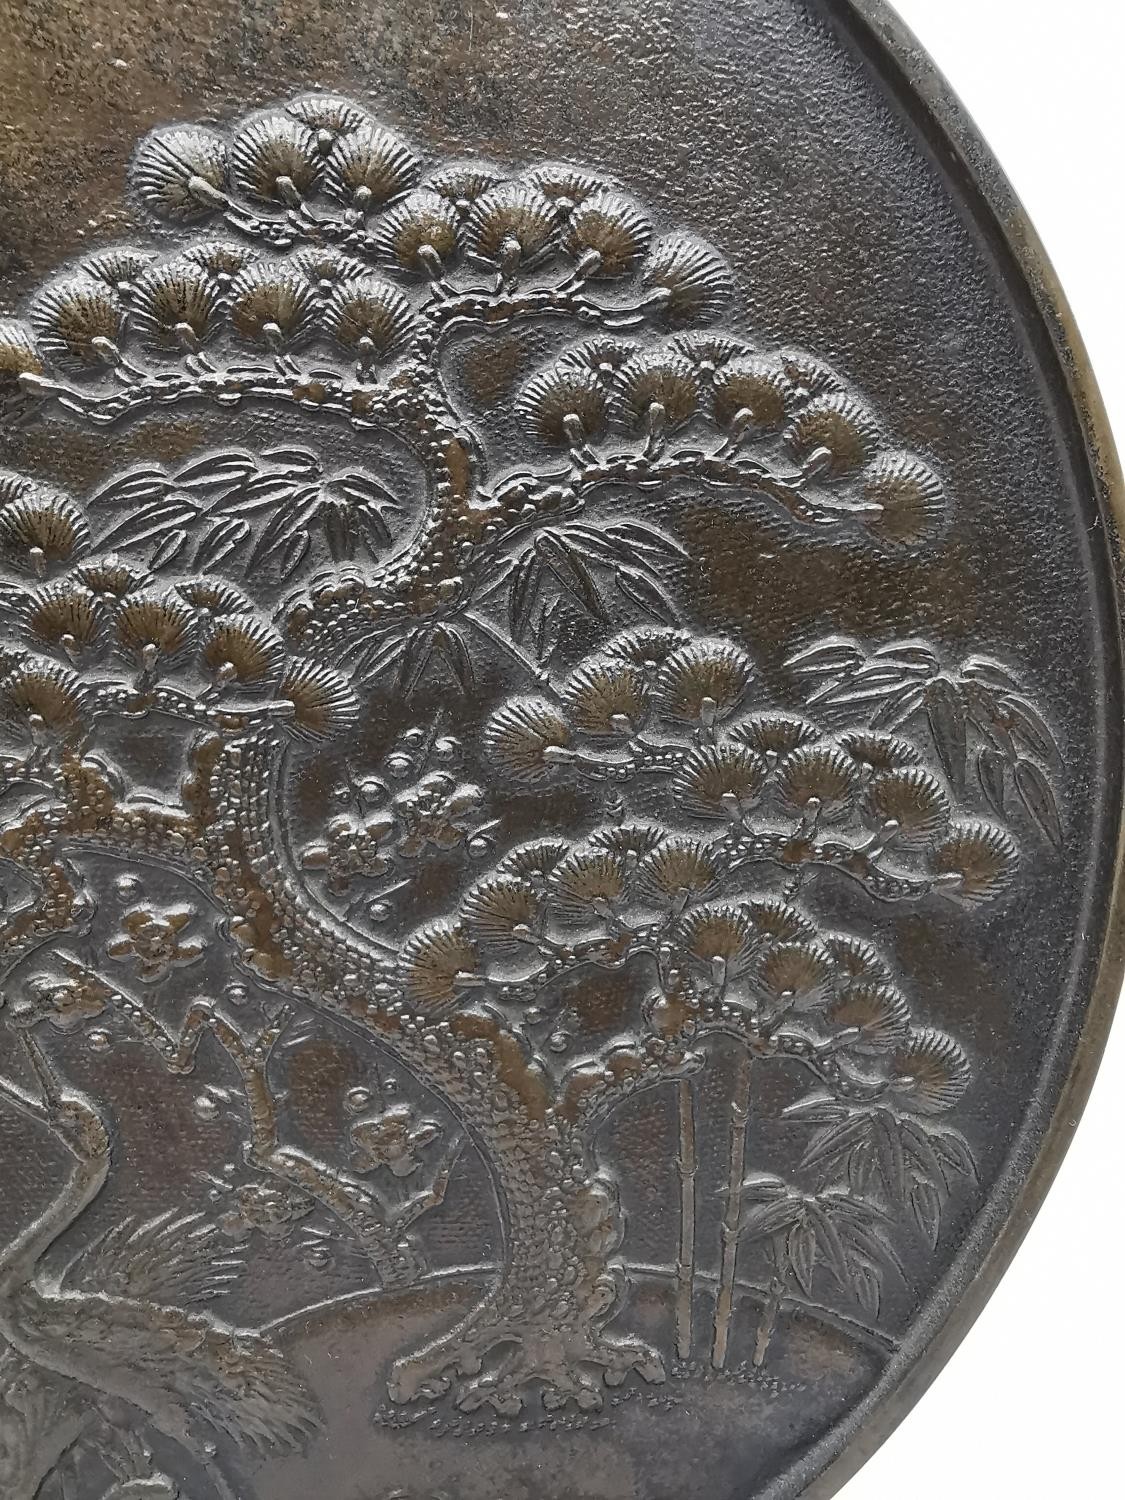 An early 20th century Japanese bronze Kagami mirror on wooden stand, decorated with a pine tree - Image 5 of 9